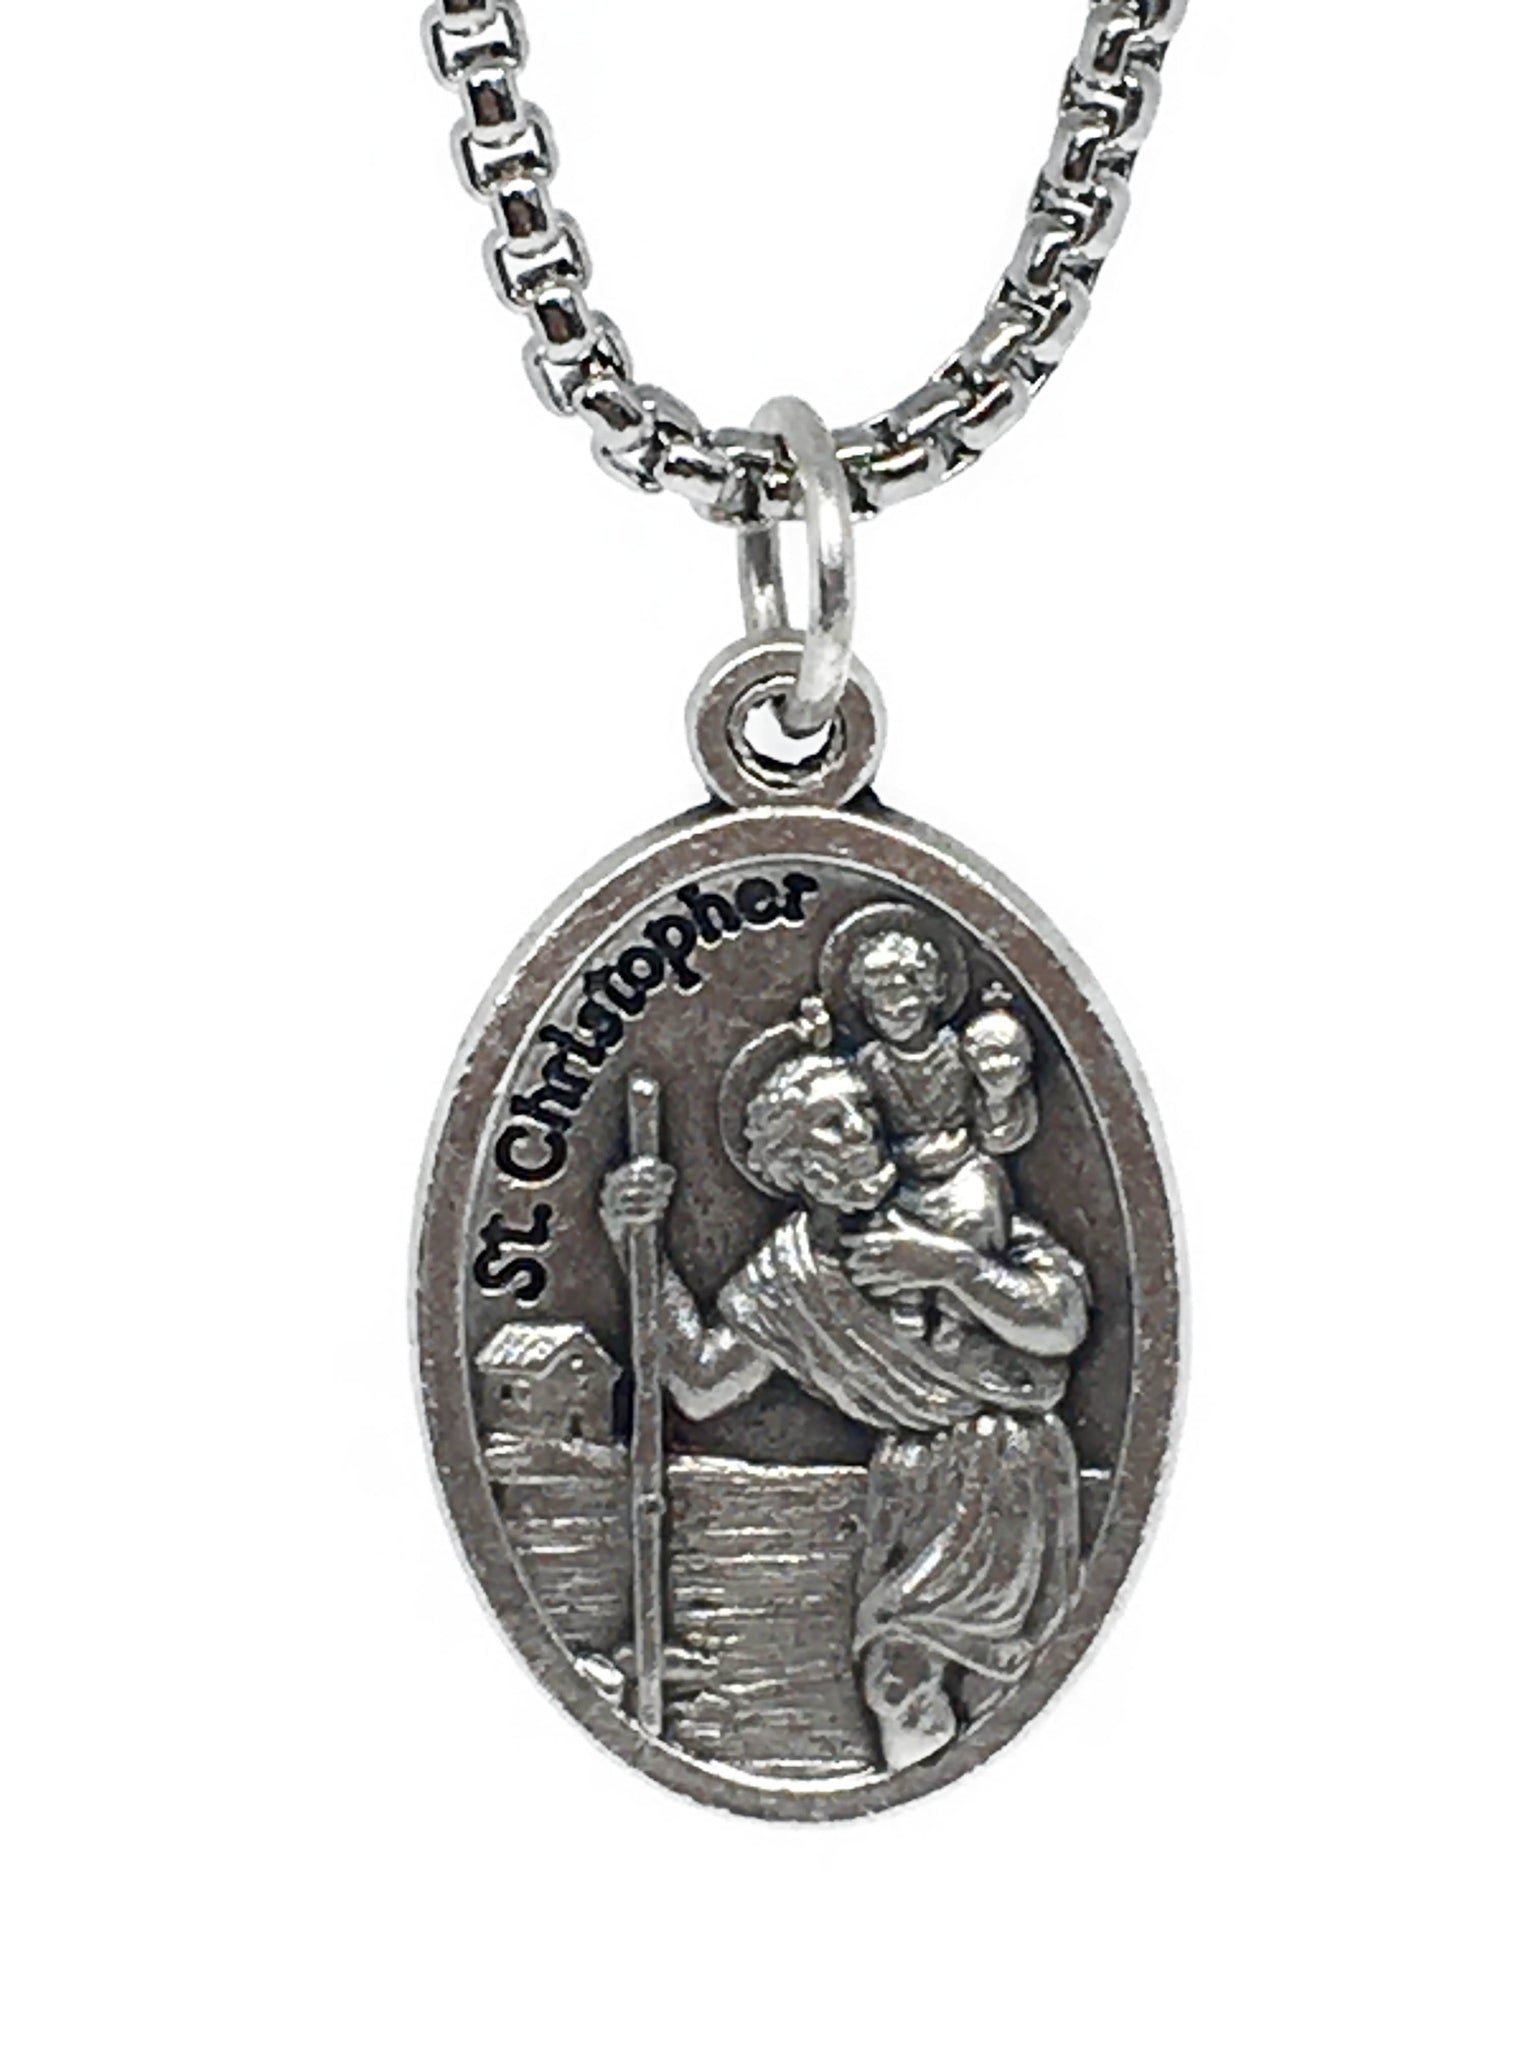 Enlightened Expressions Large Detailed Men's Genuine Pewter Saint St. Christopher  Medal Pendant 1 x 3/4 Inches Travelers/Motorists-7022E- Comes with a 24  inch Stainless Silver Heavy Curb Chain Neckace And a Black velvet